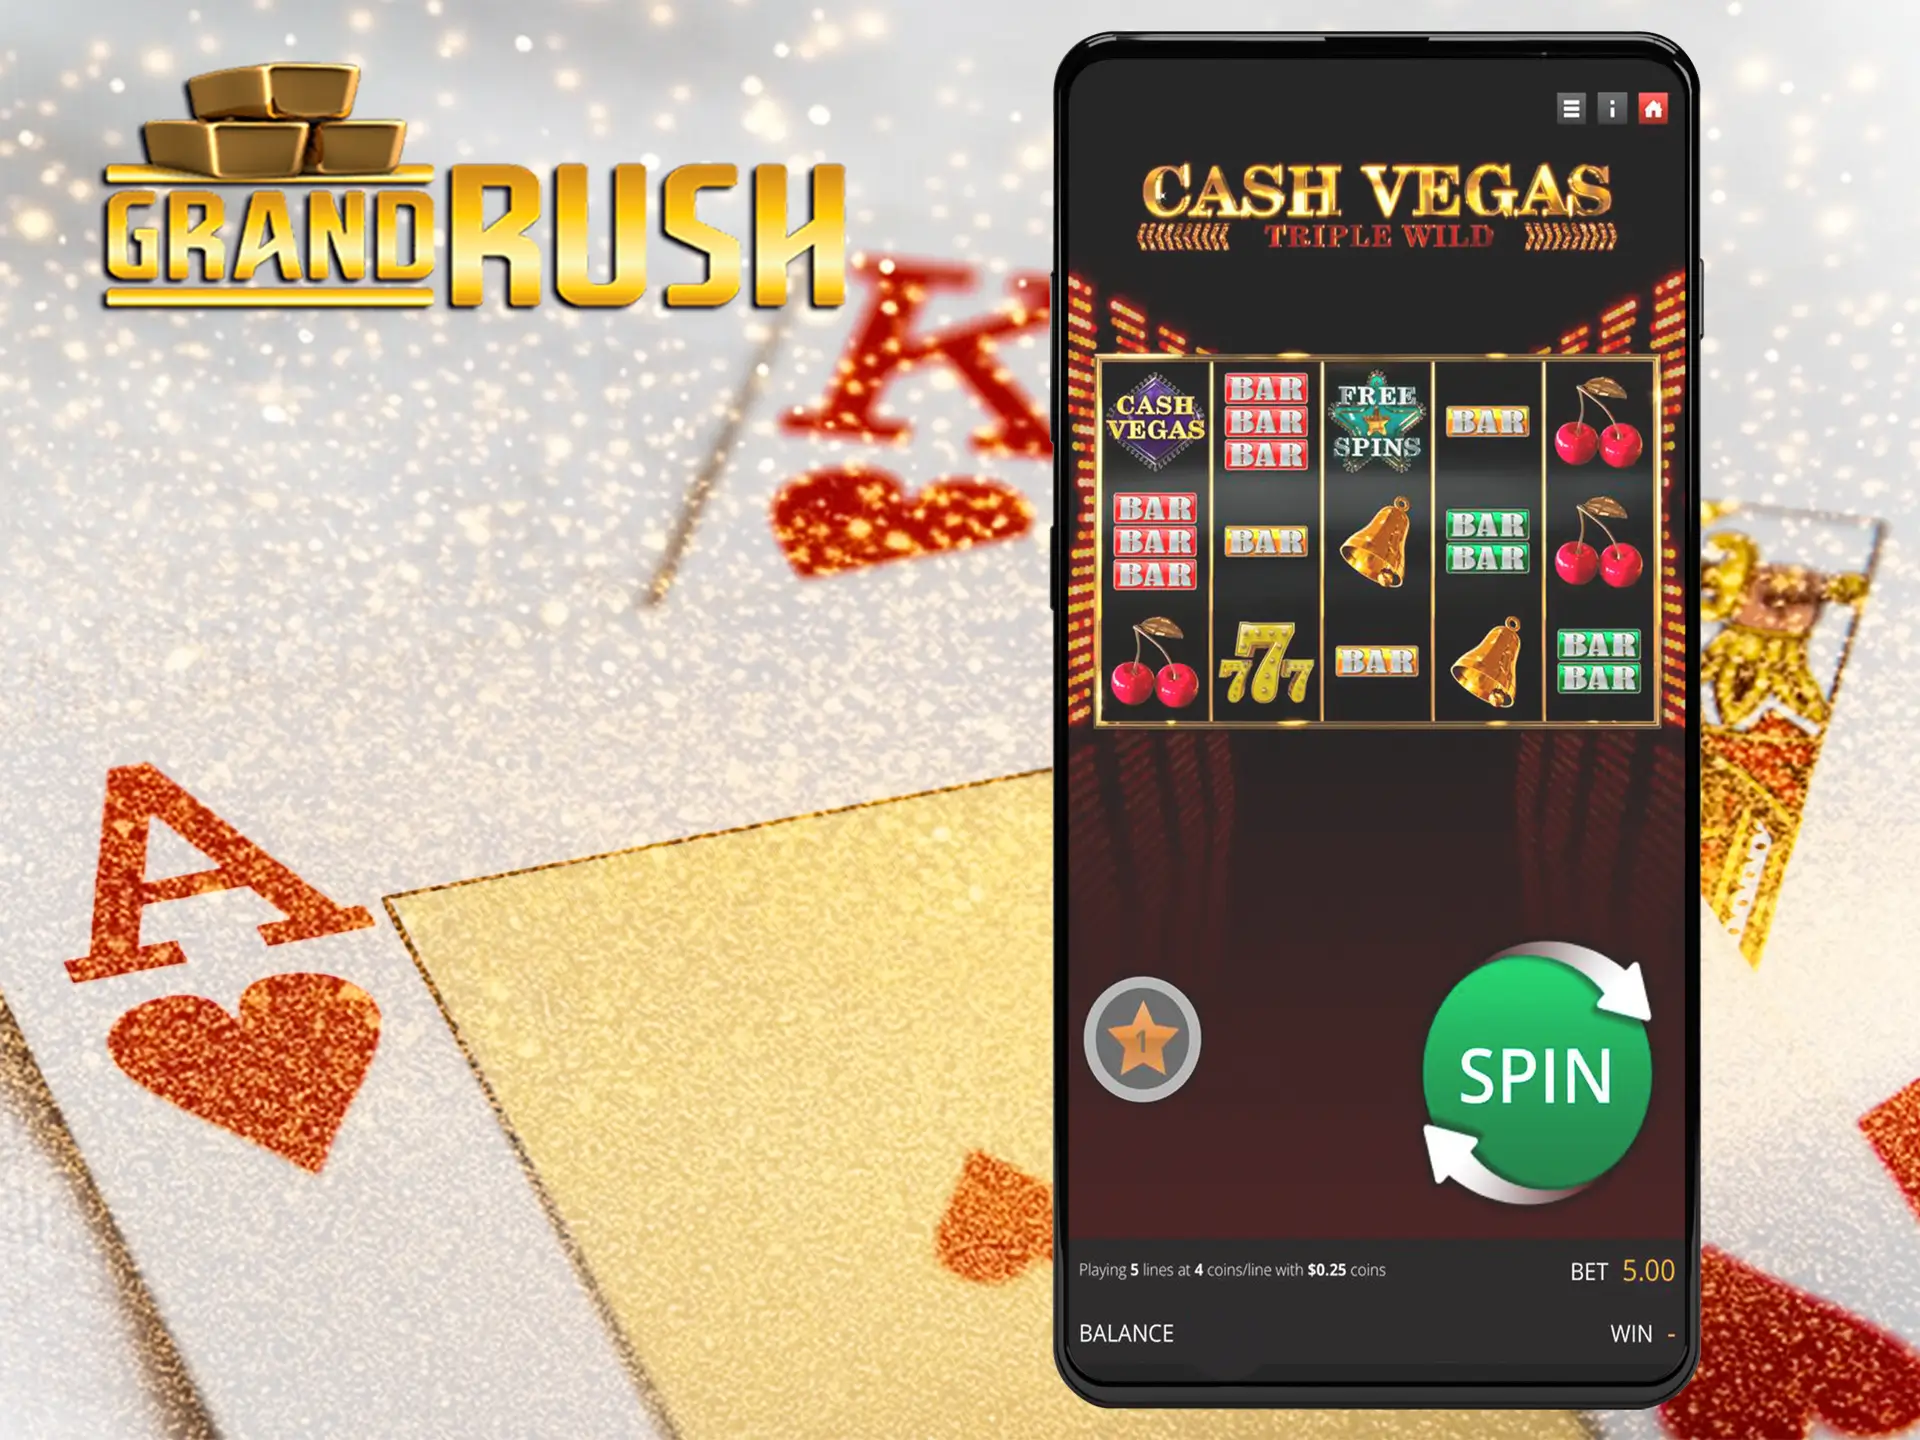 Choose a casino game and deposit to bet in the Grand Rush app.